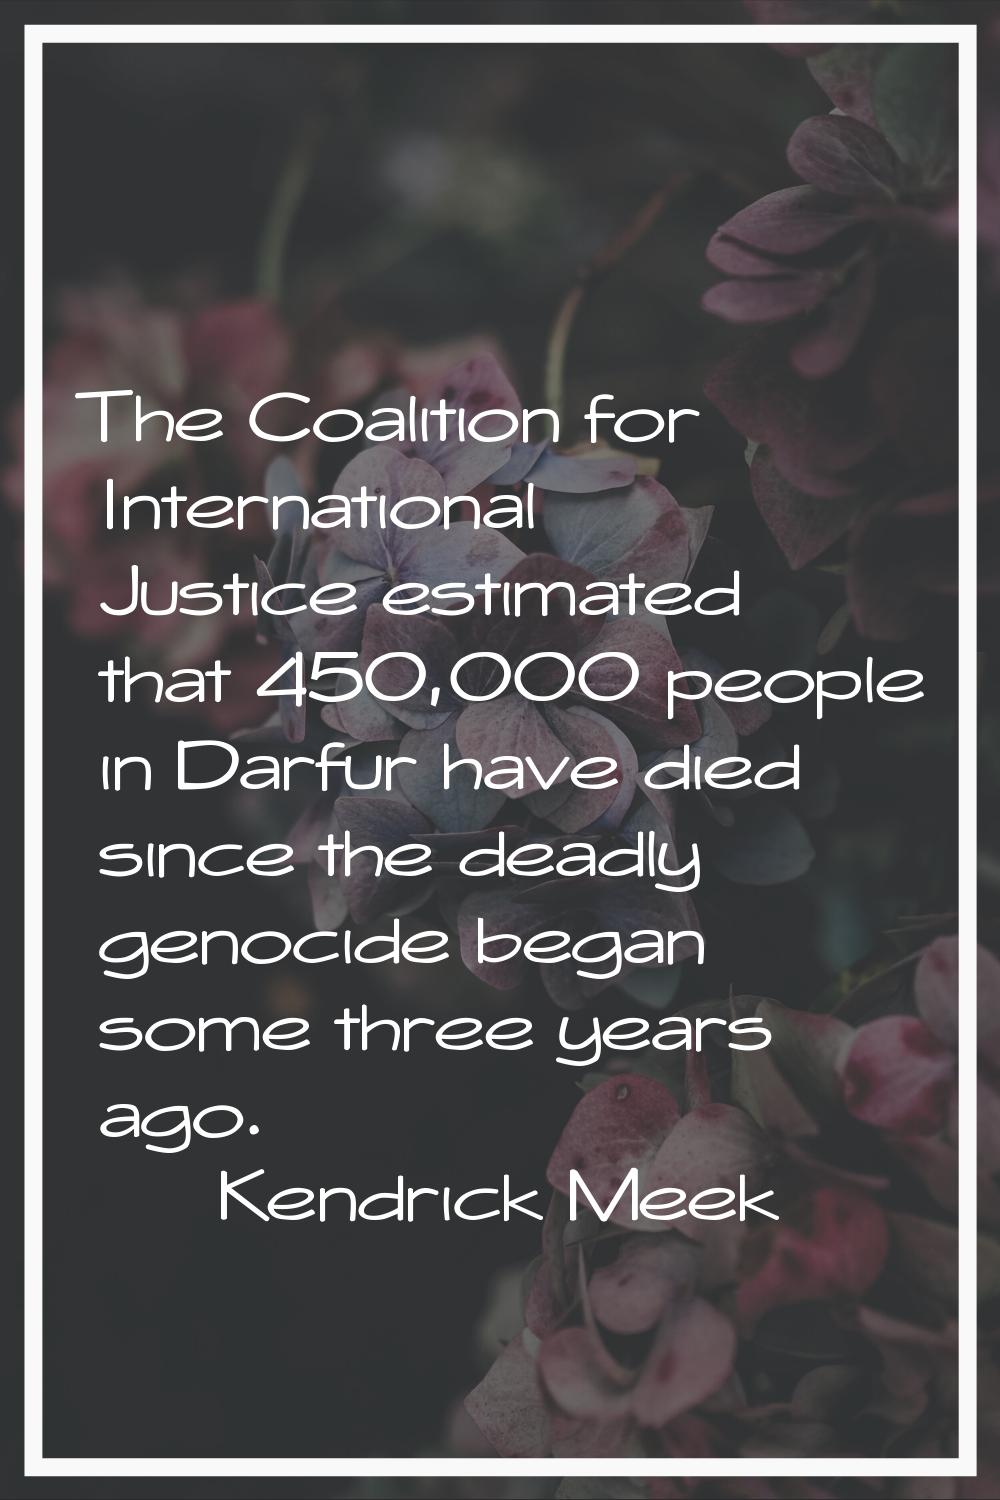 The Coalition for International Justice estimated that 450,000 people in Darfur have died since the